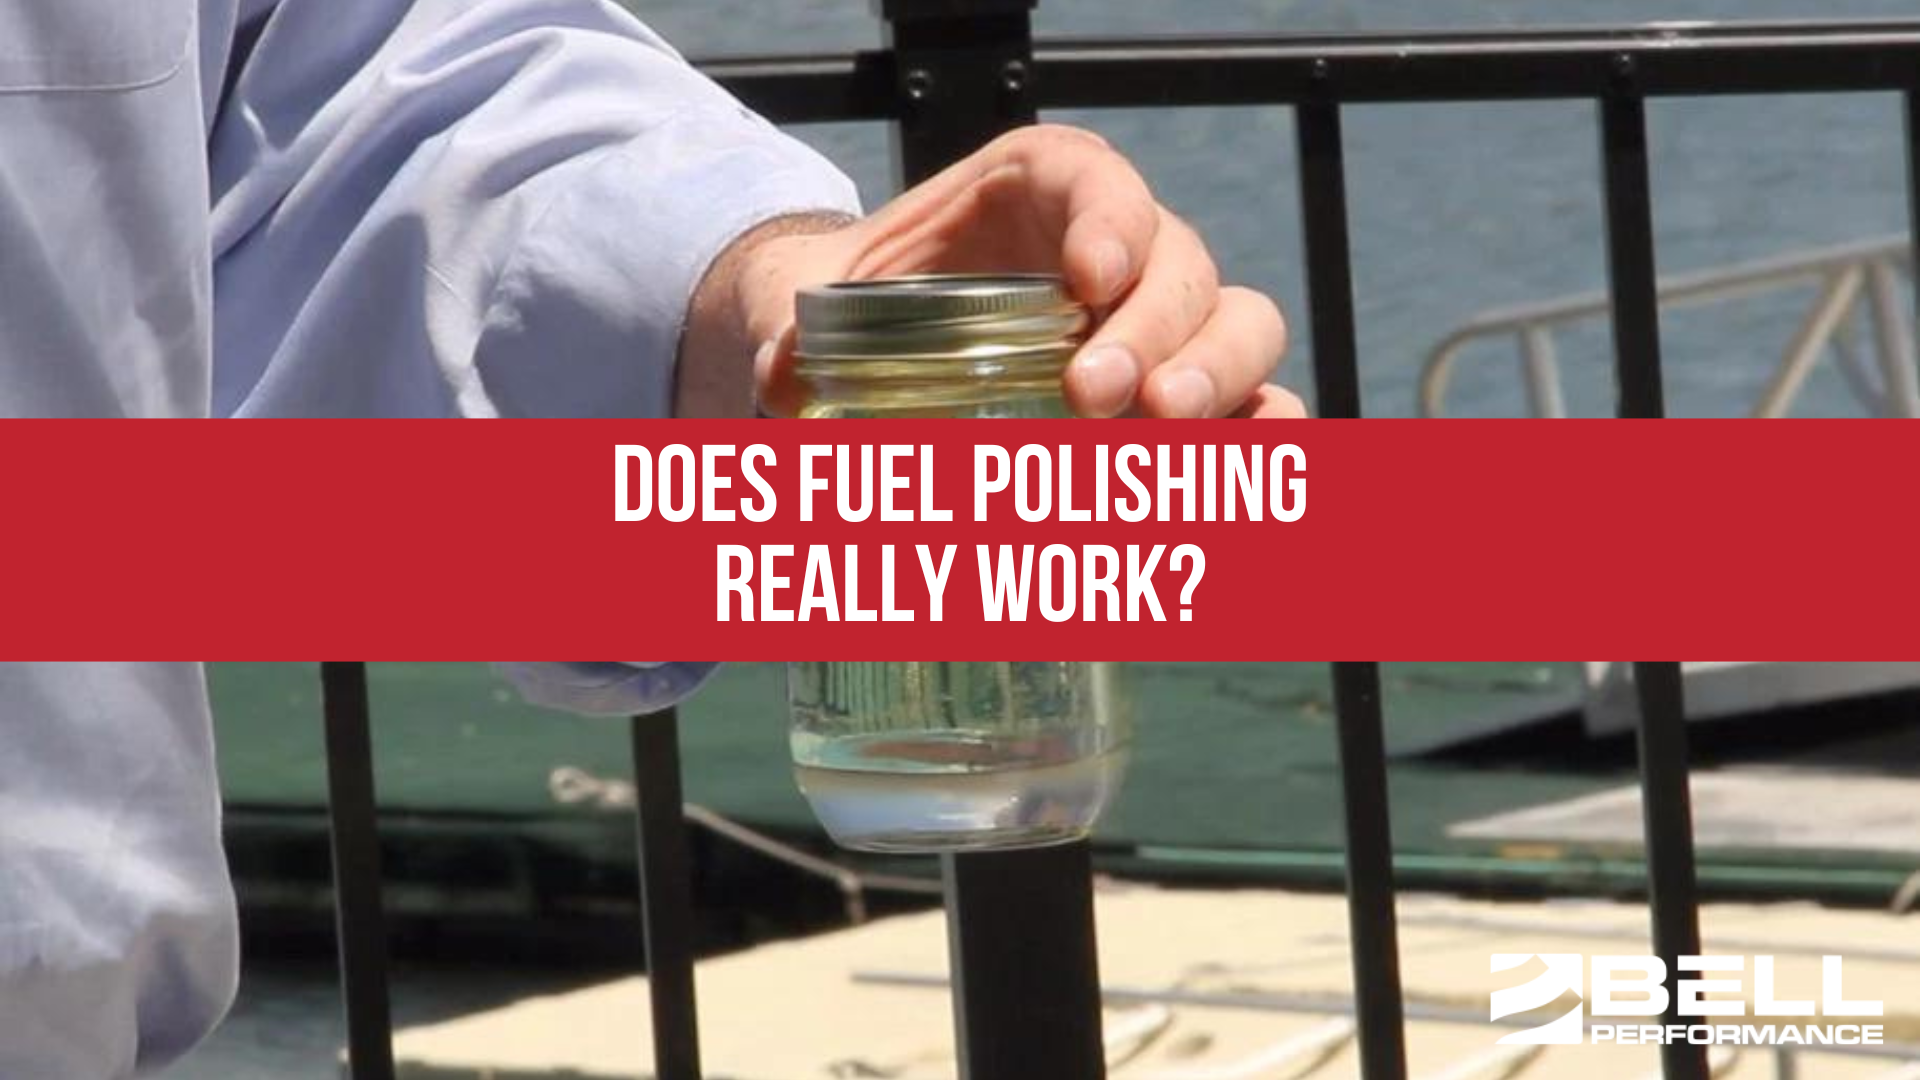 Does fuel polishing really work?